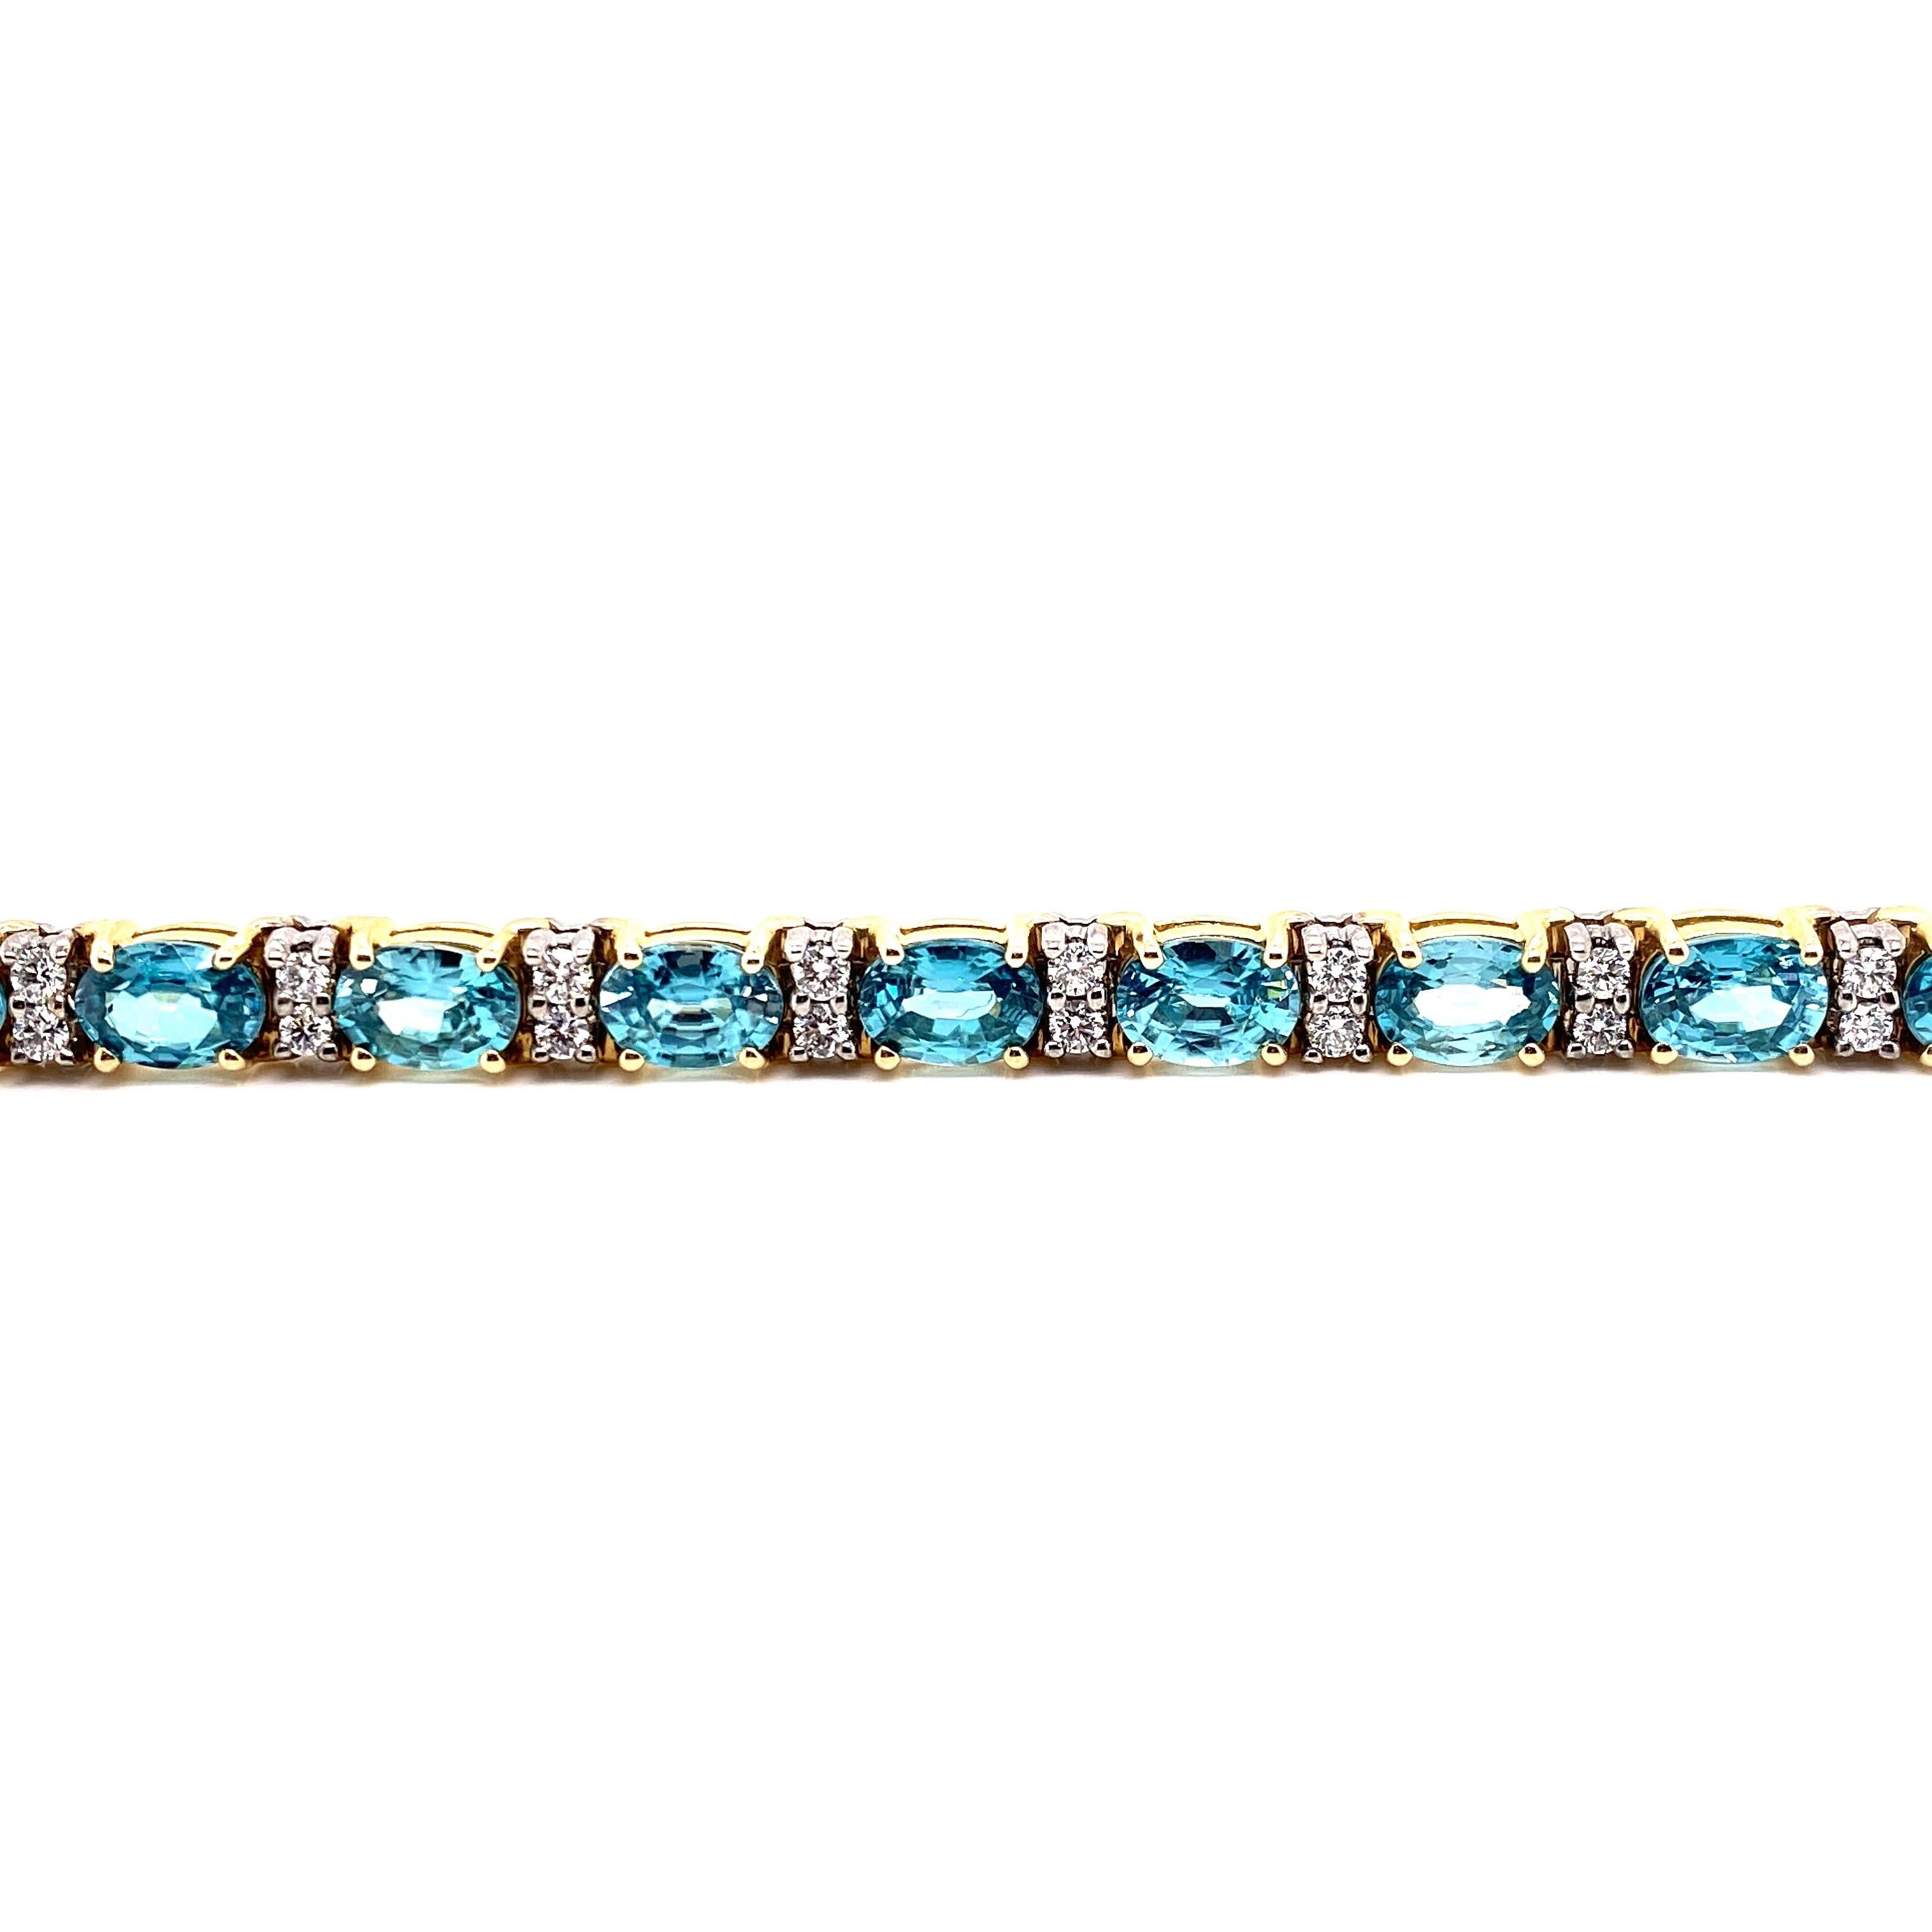 This stunning Blue Zircon and Diamond Bracelet features 18 Beautiful Oval Blue Zircons, each separated by set of 2 Radiant Round White Diamonds. This Bracelet is set in 14K Yellow and White Gold, Yellow Gold Baskets for the Blue Zircons and White